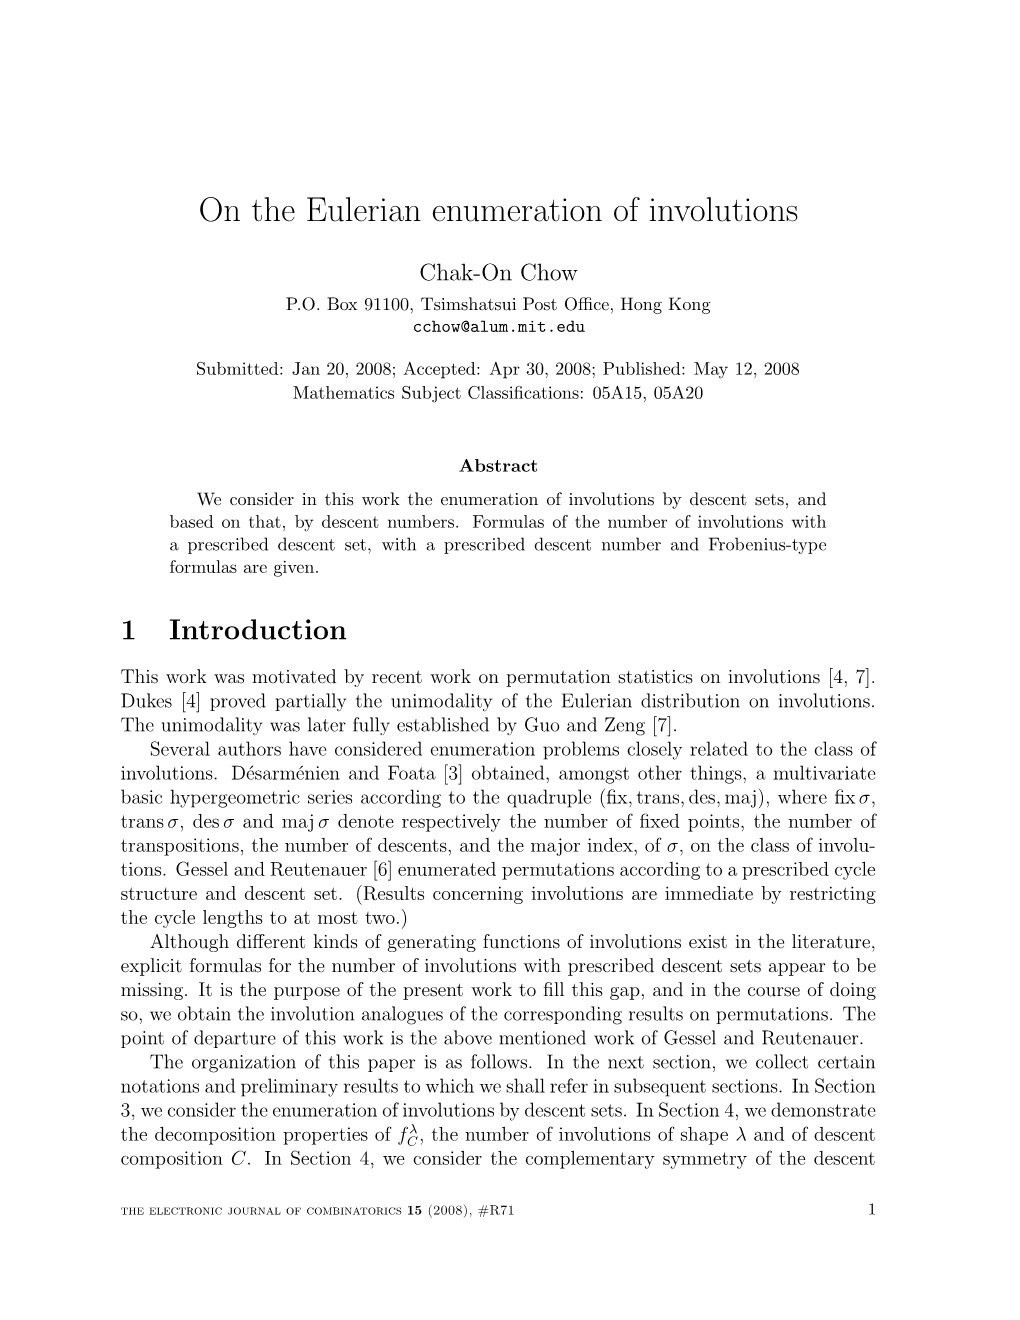 On the Eulerian Enumeration of Involutions